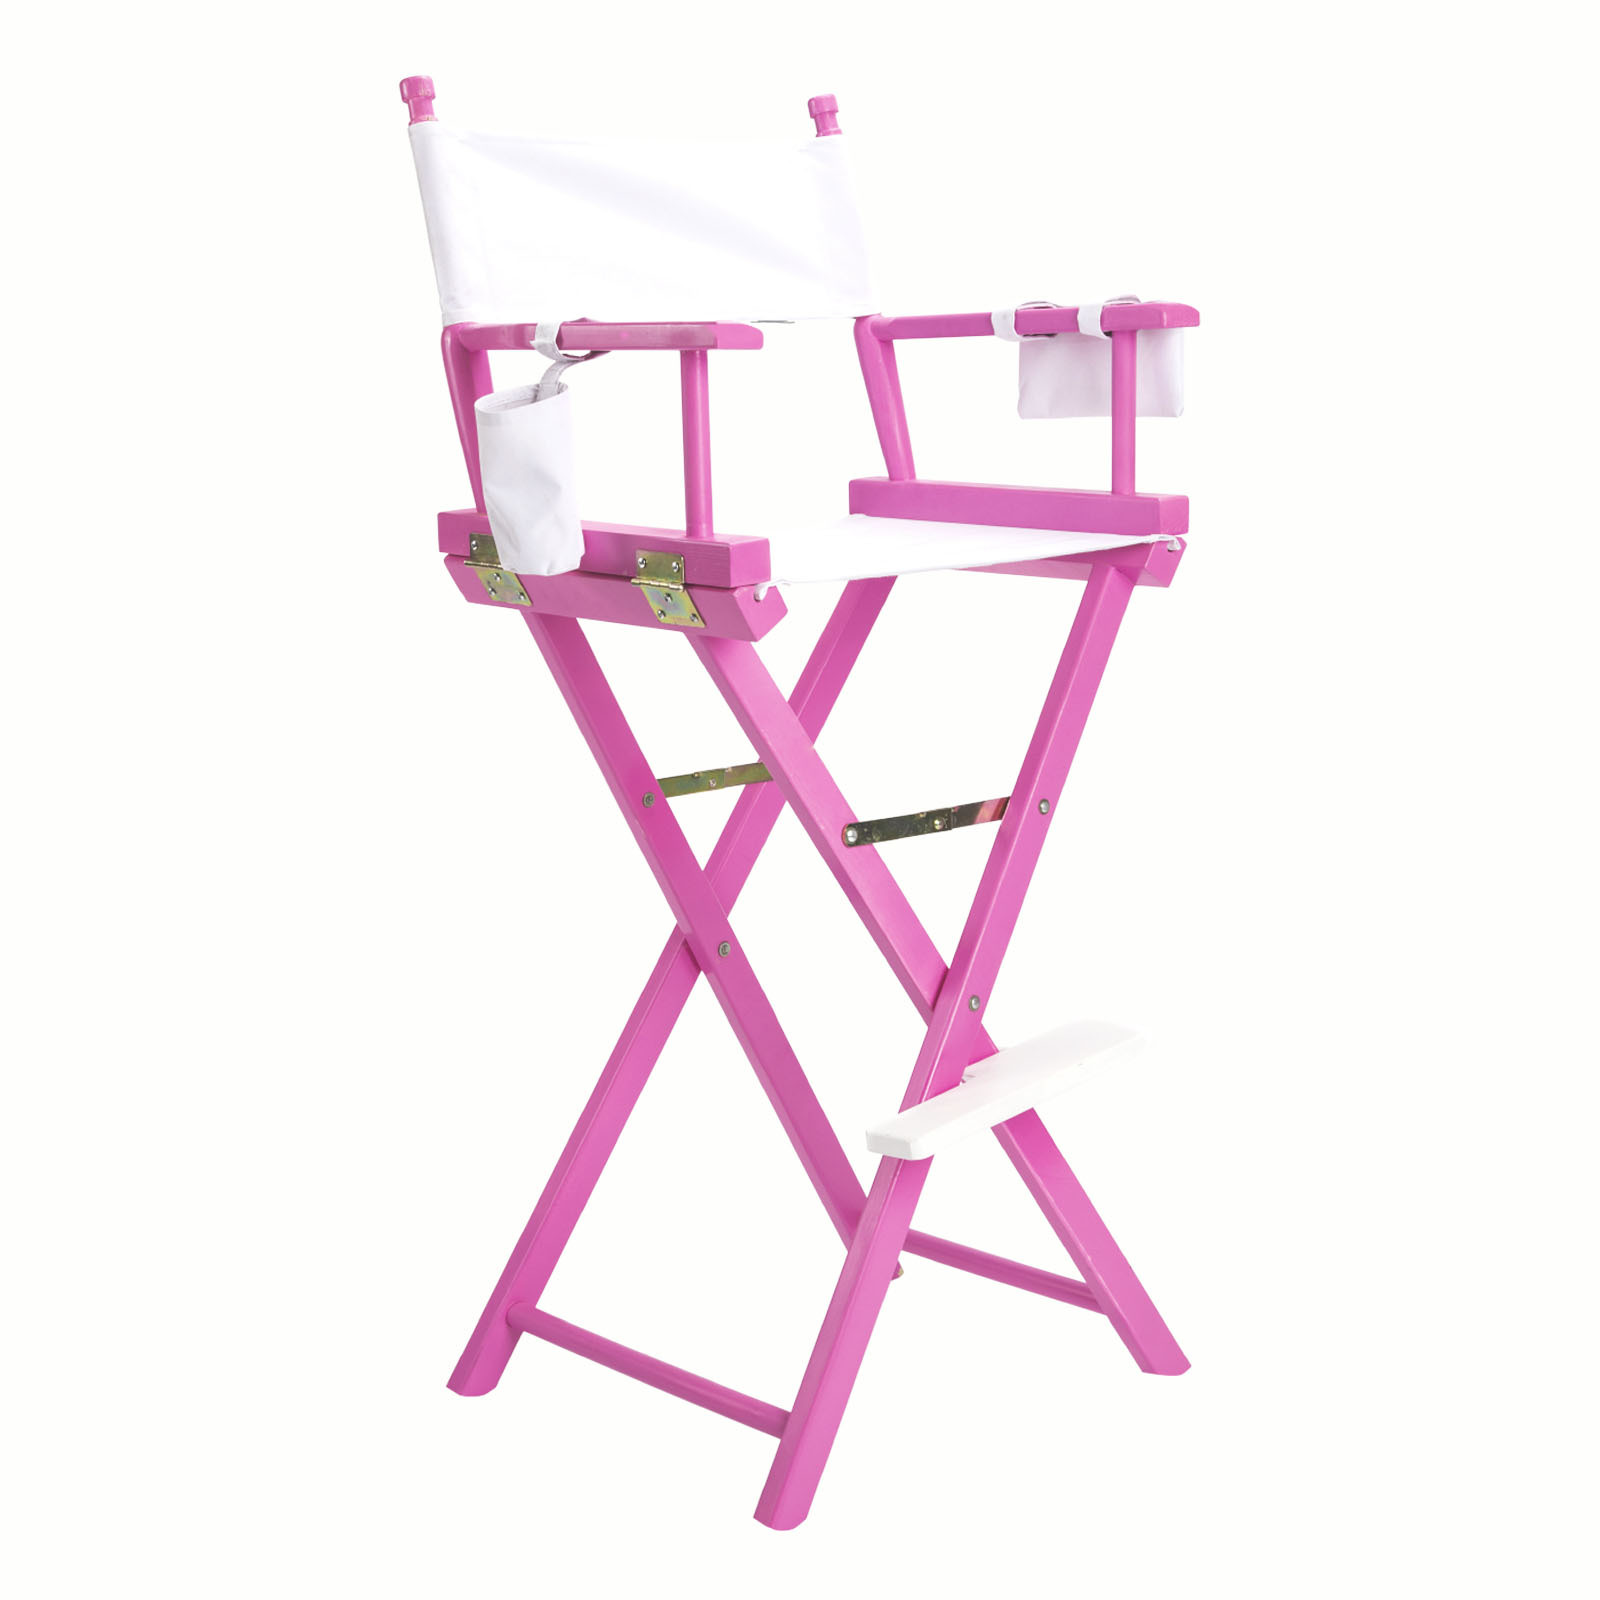 77cm Tall Director Chair - PINK HUMOR